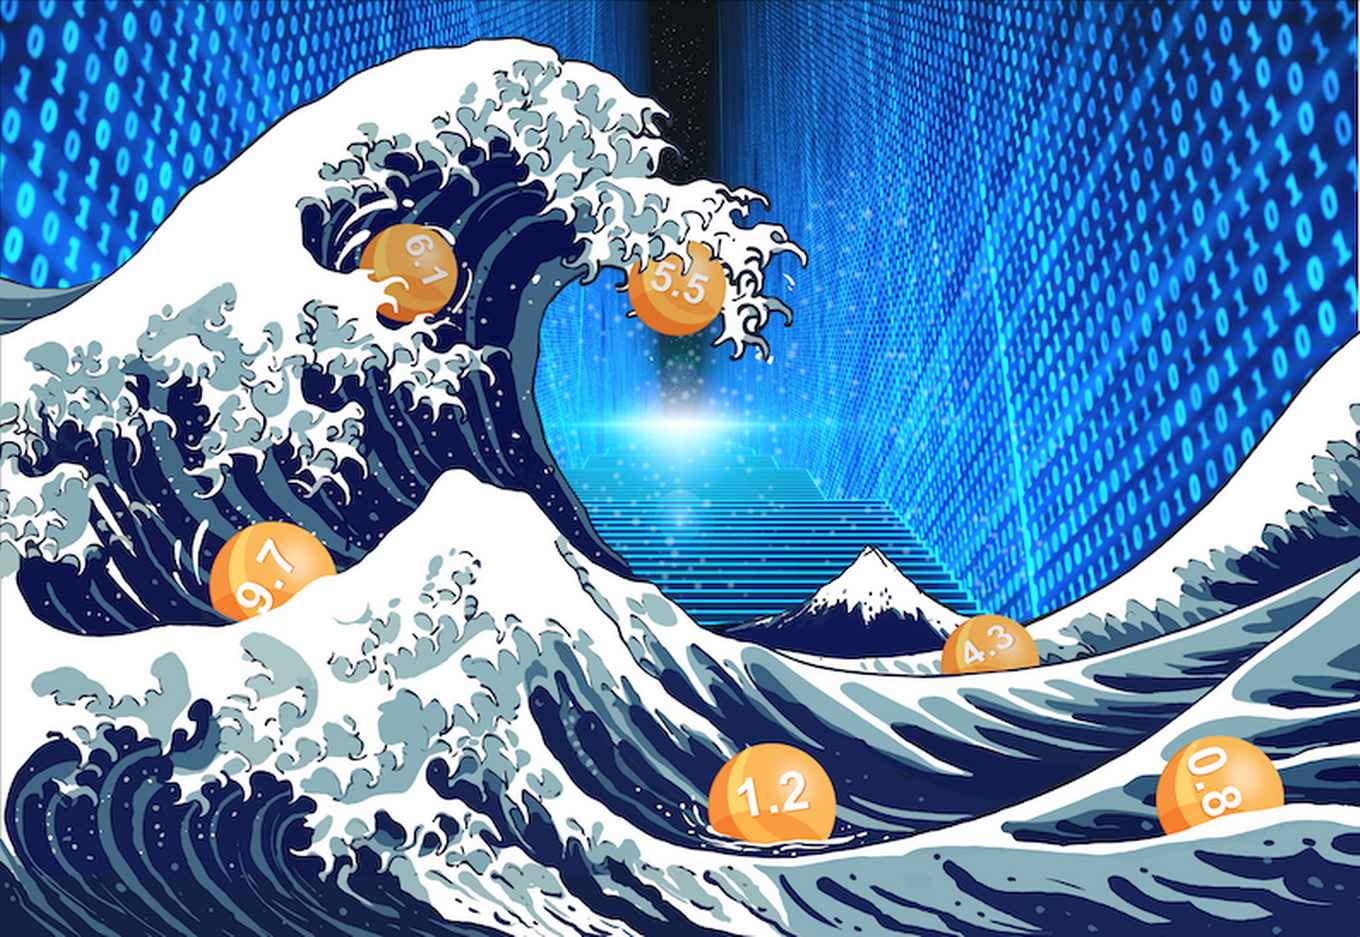 “The Great Floating Point Wave” in homage to Hokusai’s “The Great Wave Off Kanagawa”